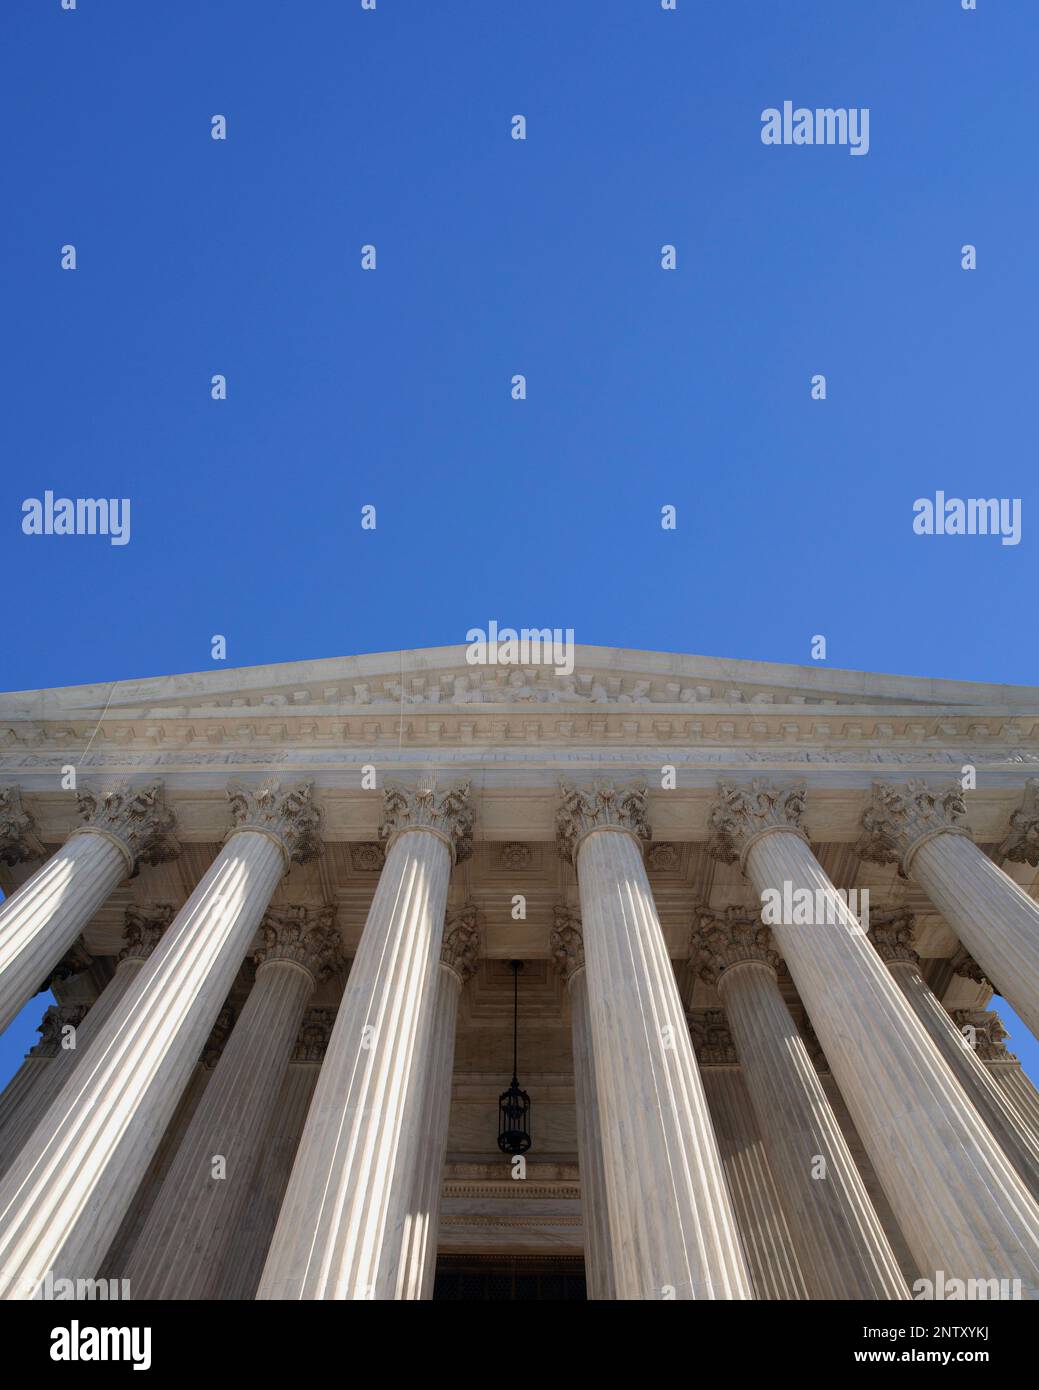 Upward view of the Supreme Court Building in Washington DC with blue sky. Stock Photo